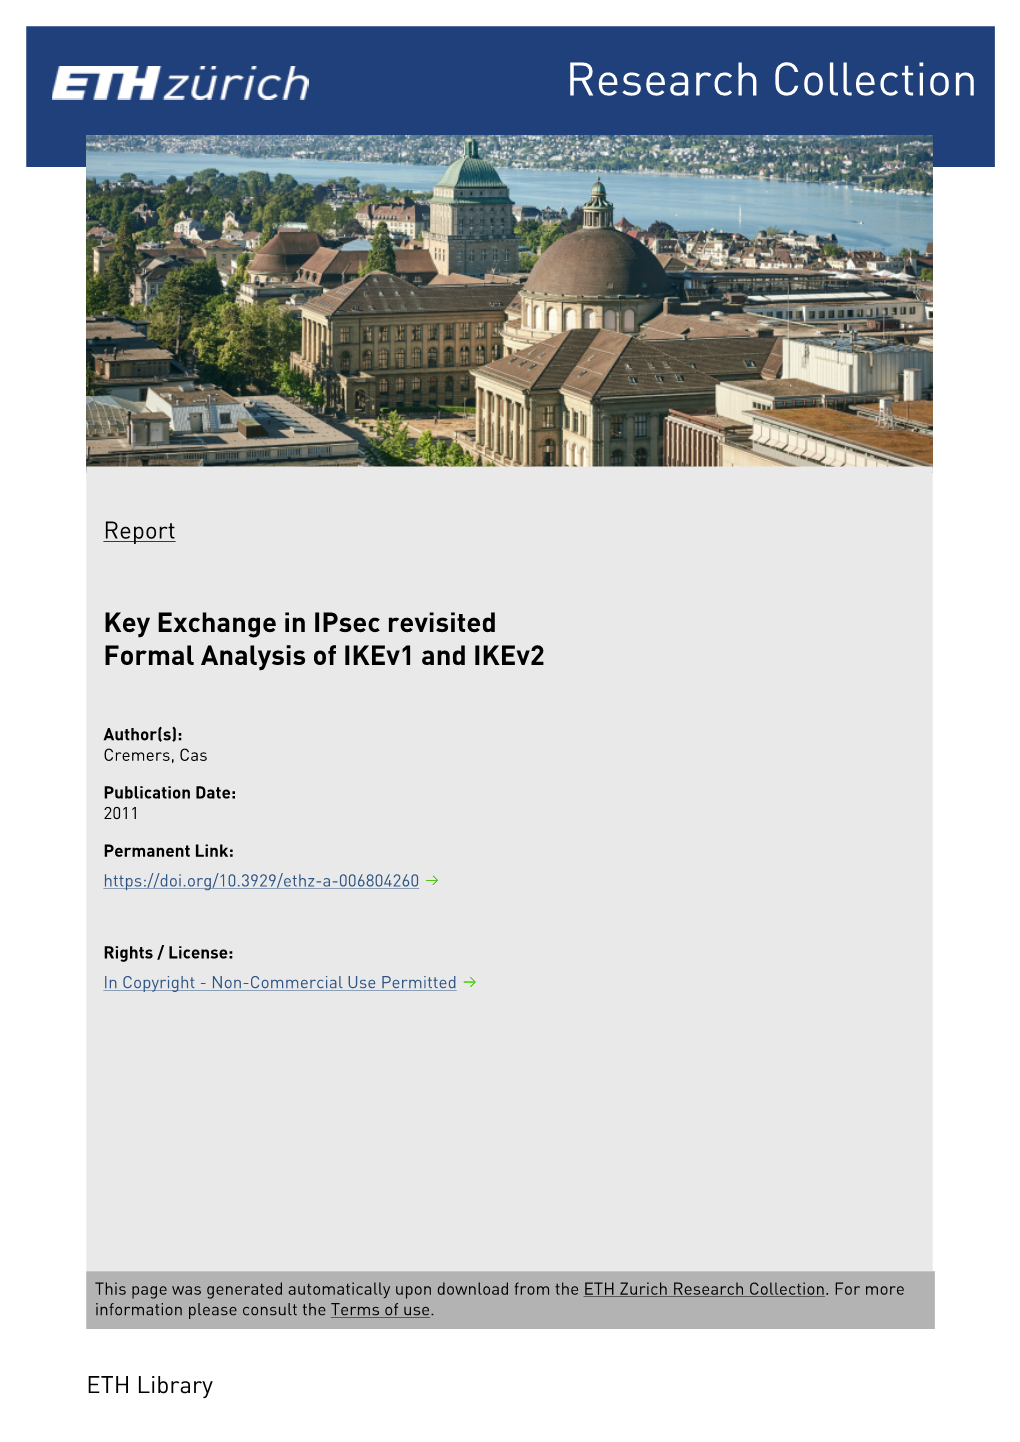 Key Exchange in Ipsec Revisited Formal Analysis of Ikev1 and Ikev2